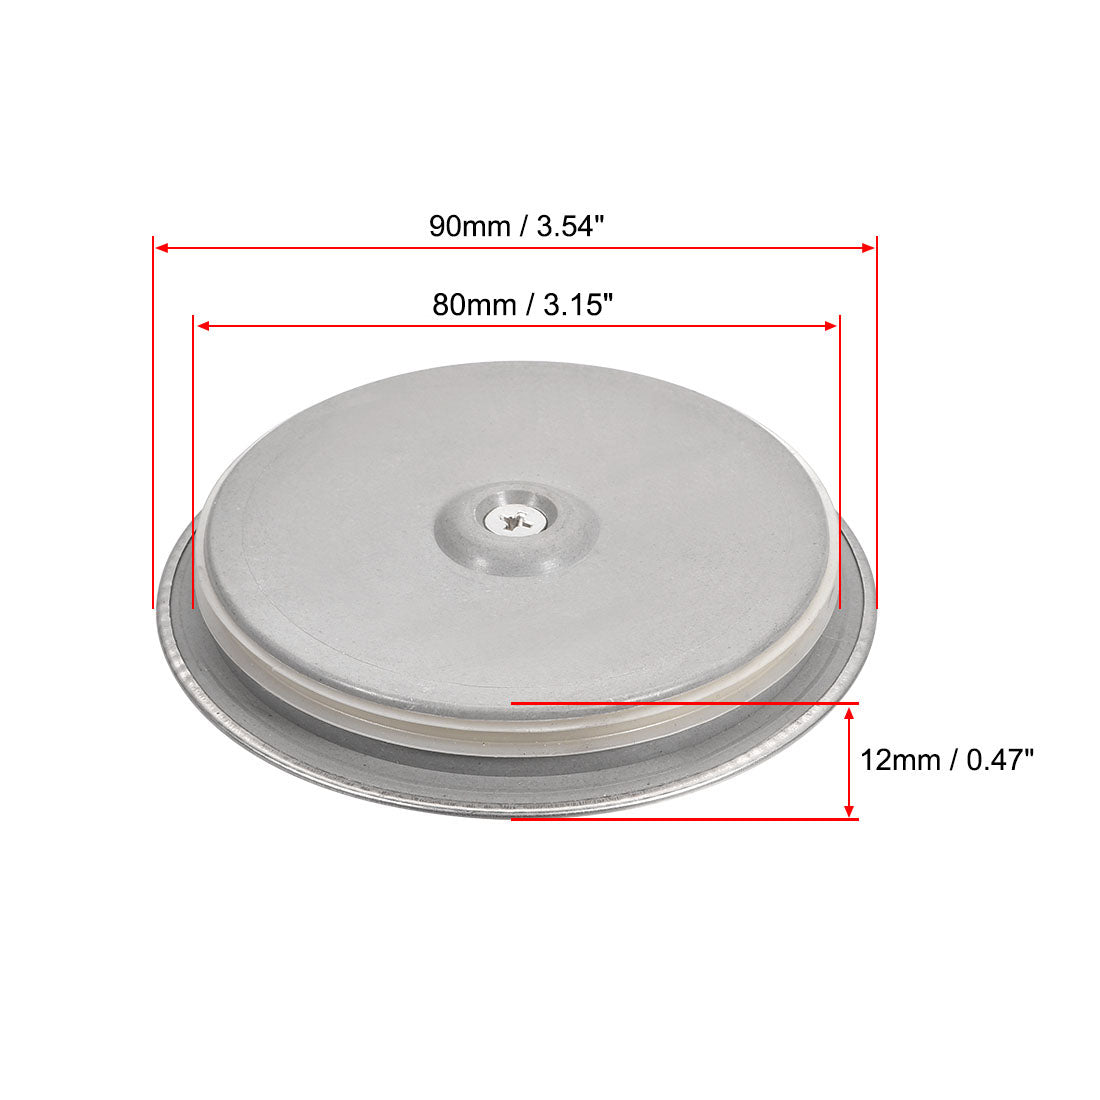 uxcell Uxcell Kitchen Sink Drain Stopper Rubber Seal 80mm Stainless Steel Sealing Lid for Kitchen Sink